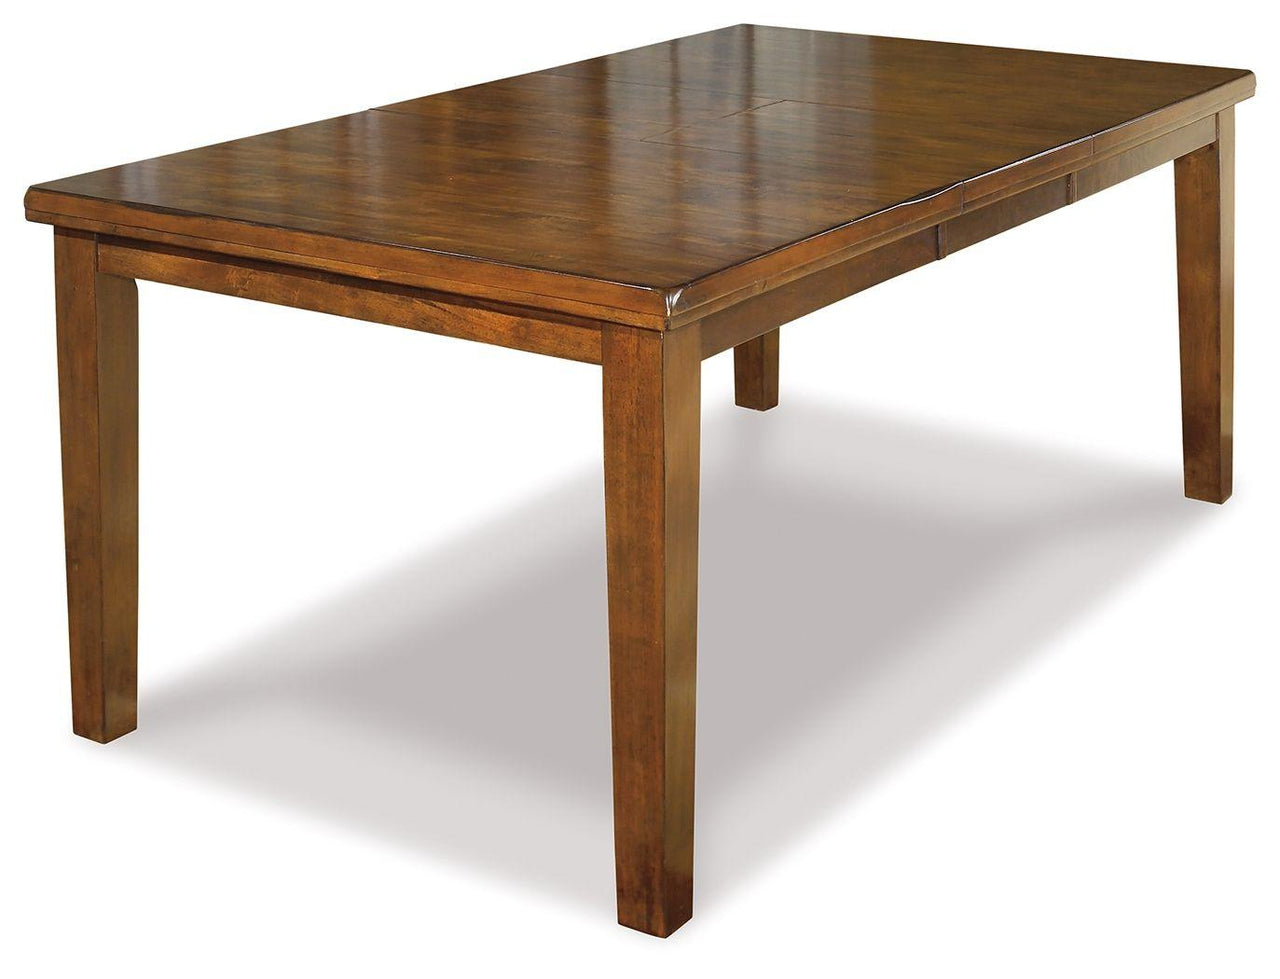 Ralene - Medium Brown - Rect Drm Butterfly Ext Table Tony's Home Furnishings Furniture. Beds. Dressers. Sofas.